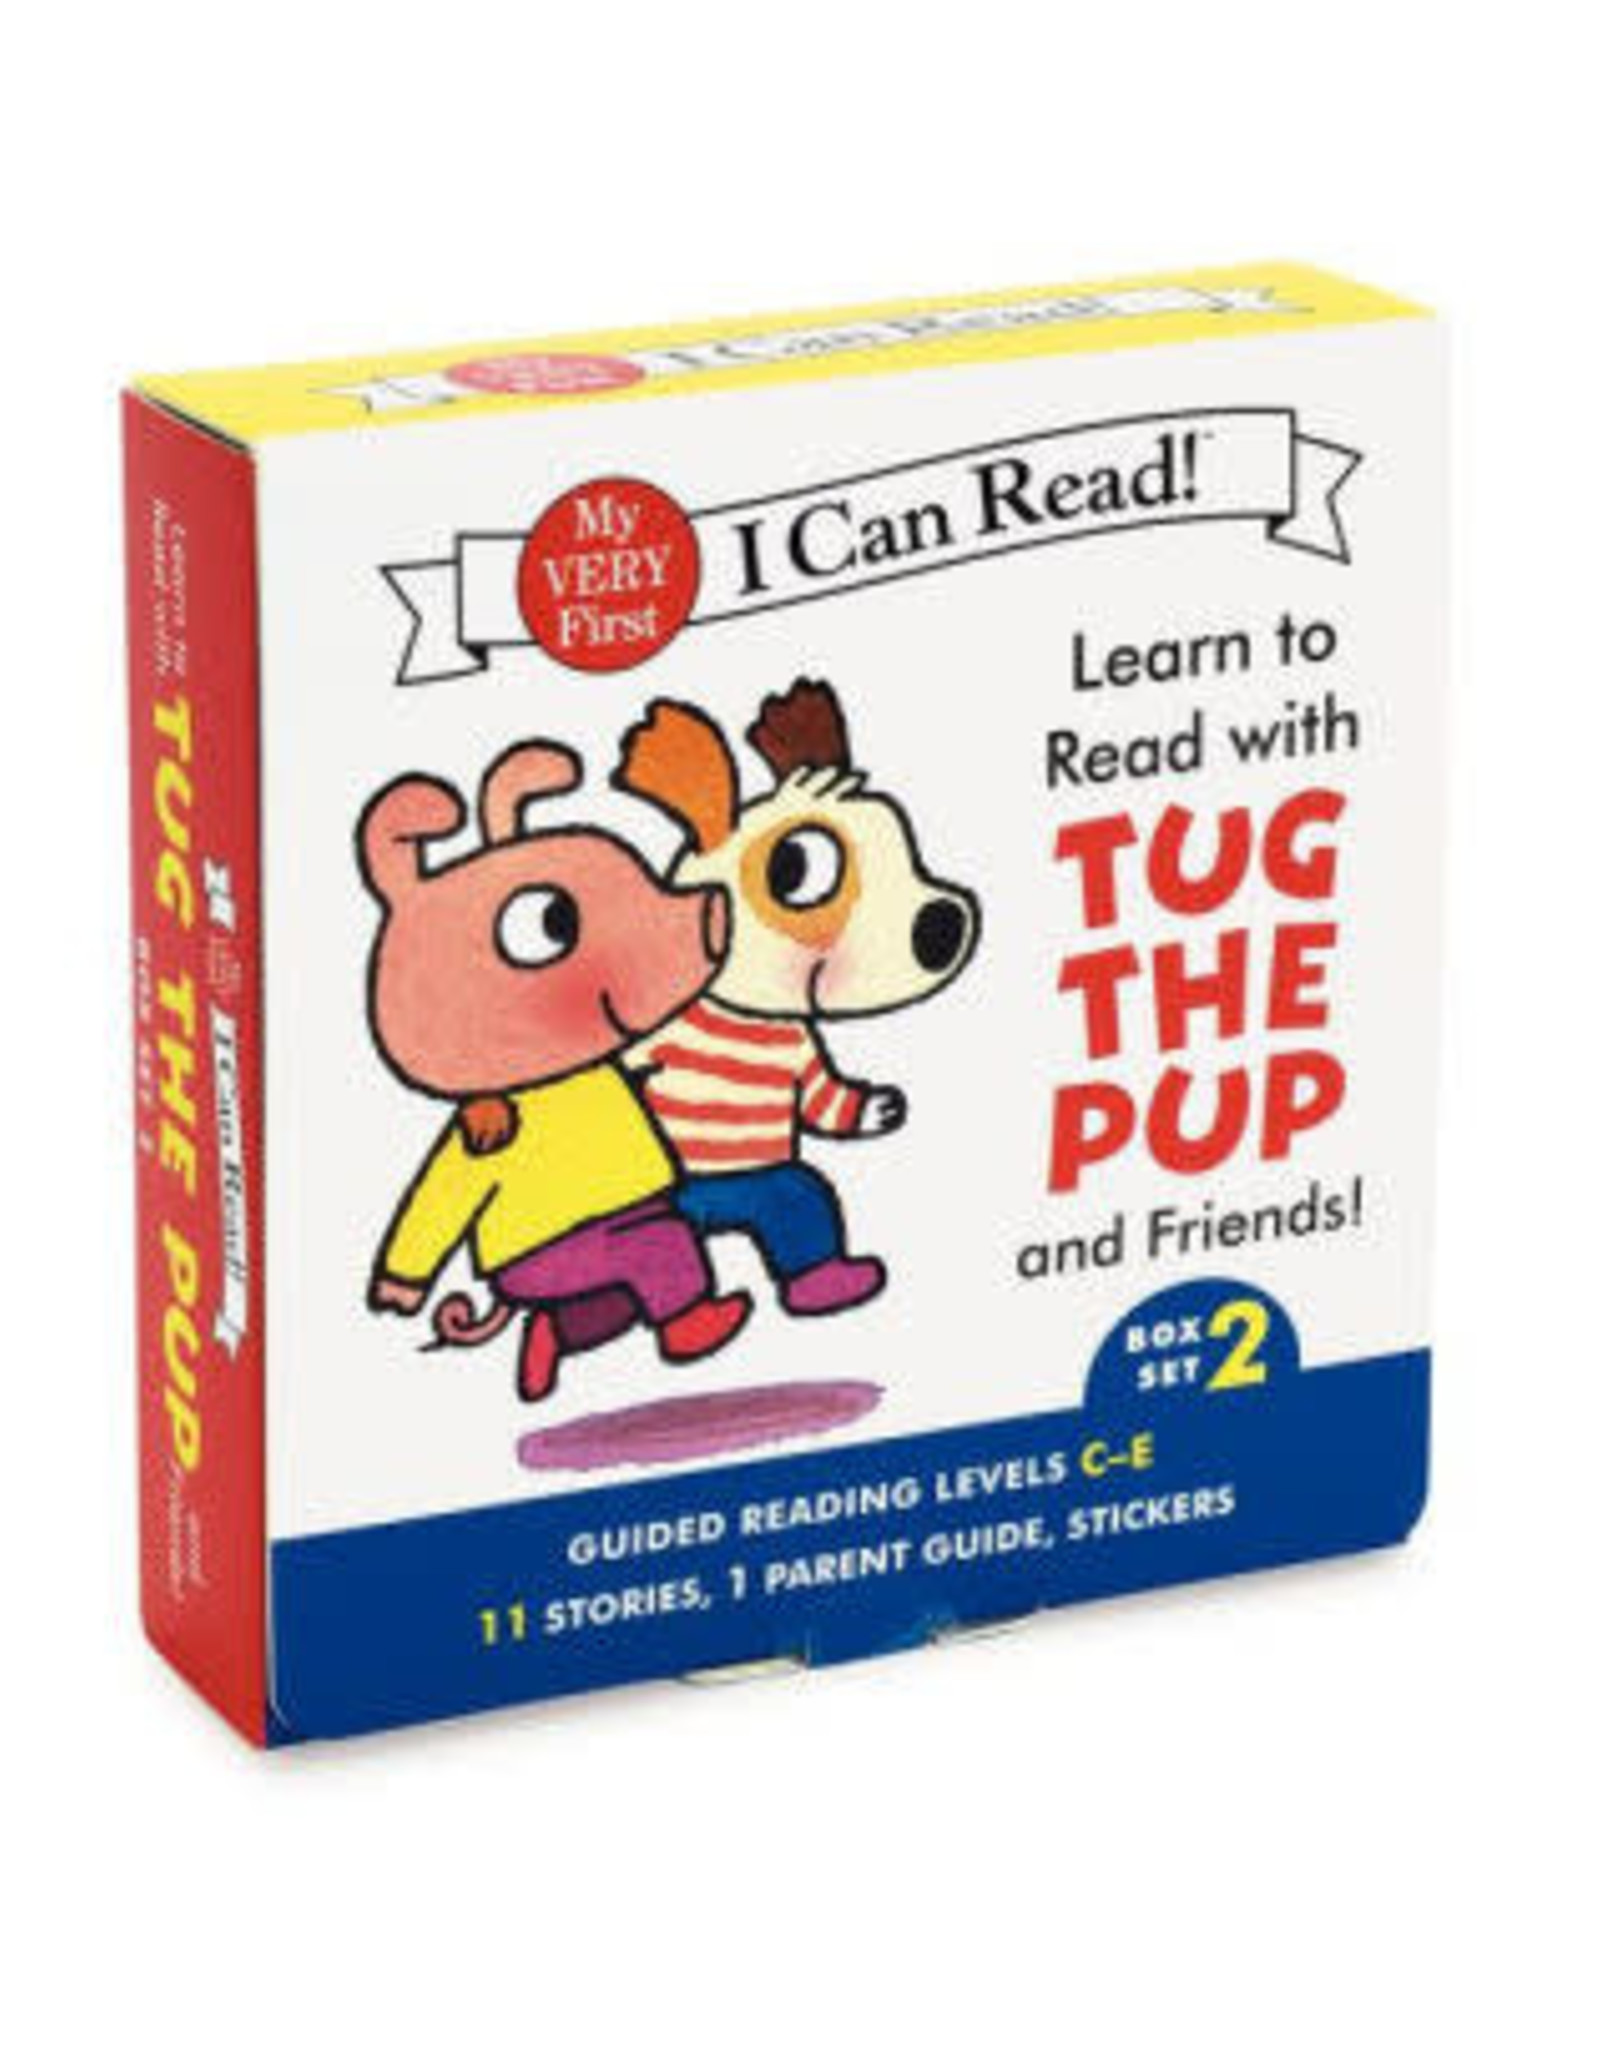 I Can Read! Learn to Read-Tug the Pup&Friend! Box Set 2